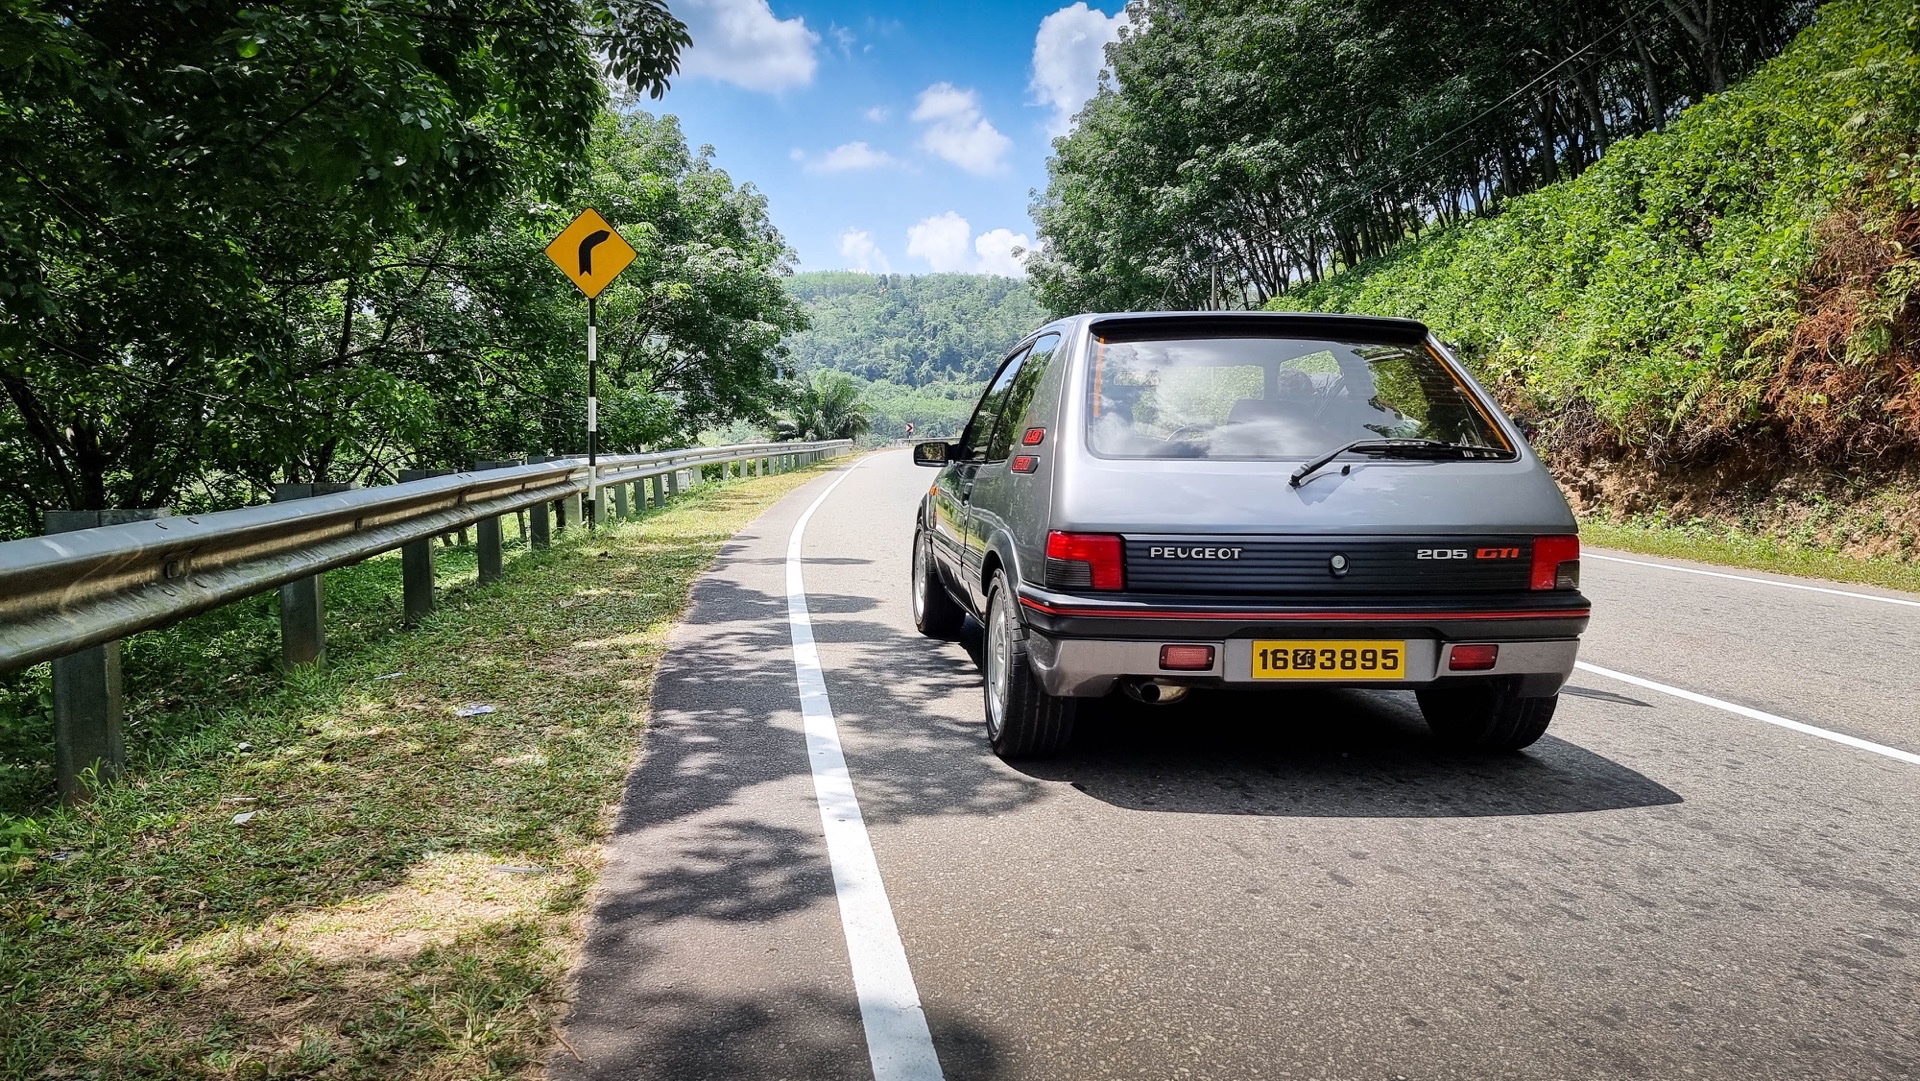 The Peugeot 205 GTI Buying Guide - '80s hot hatch perfection